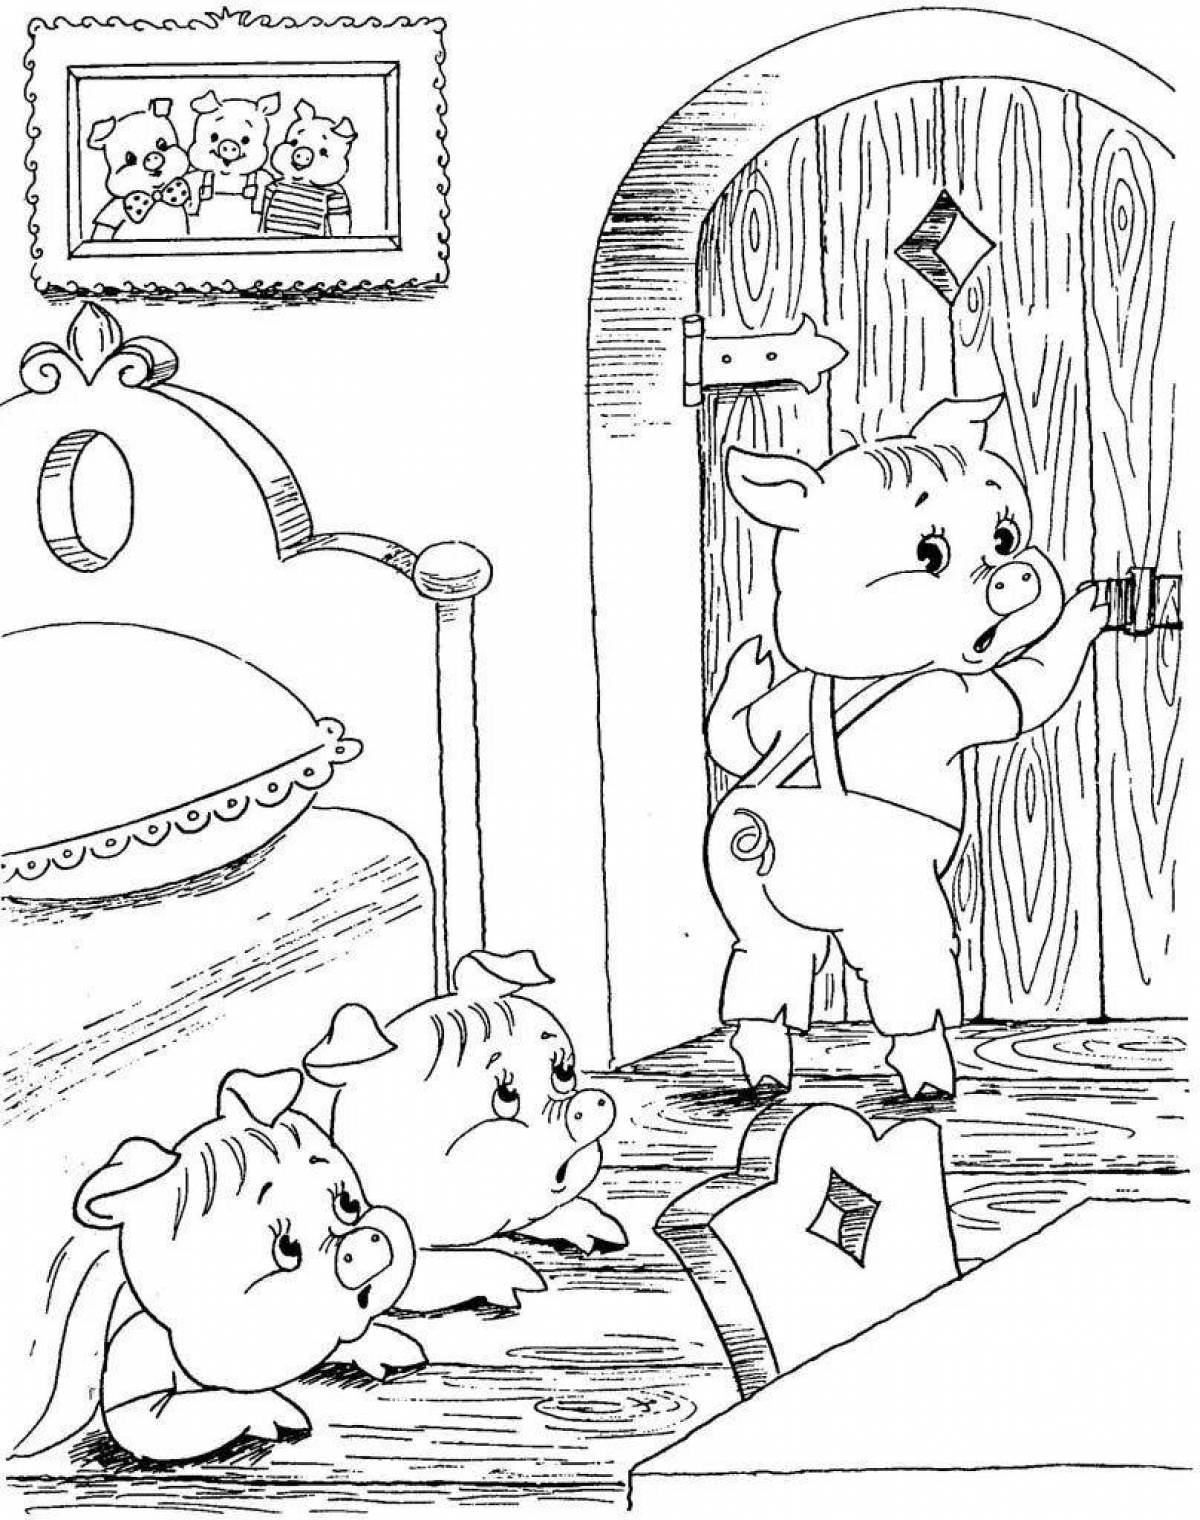 3 little pigs creative coloring book for kids